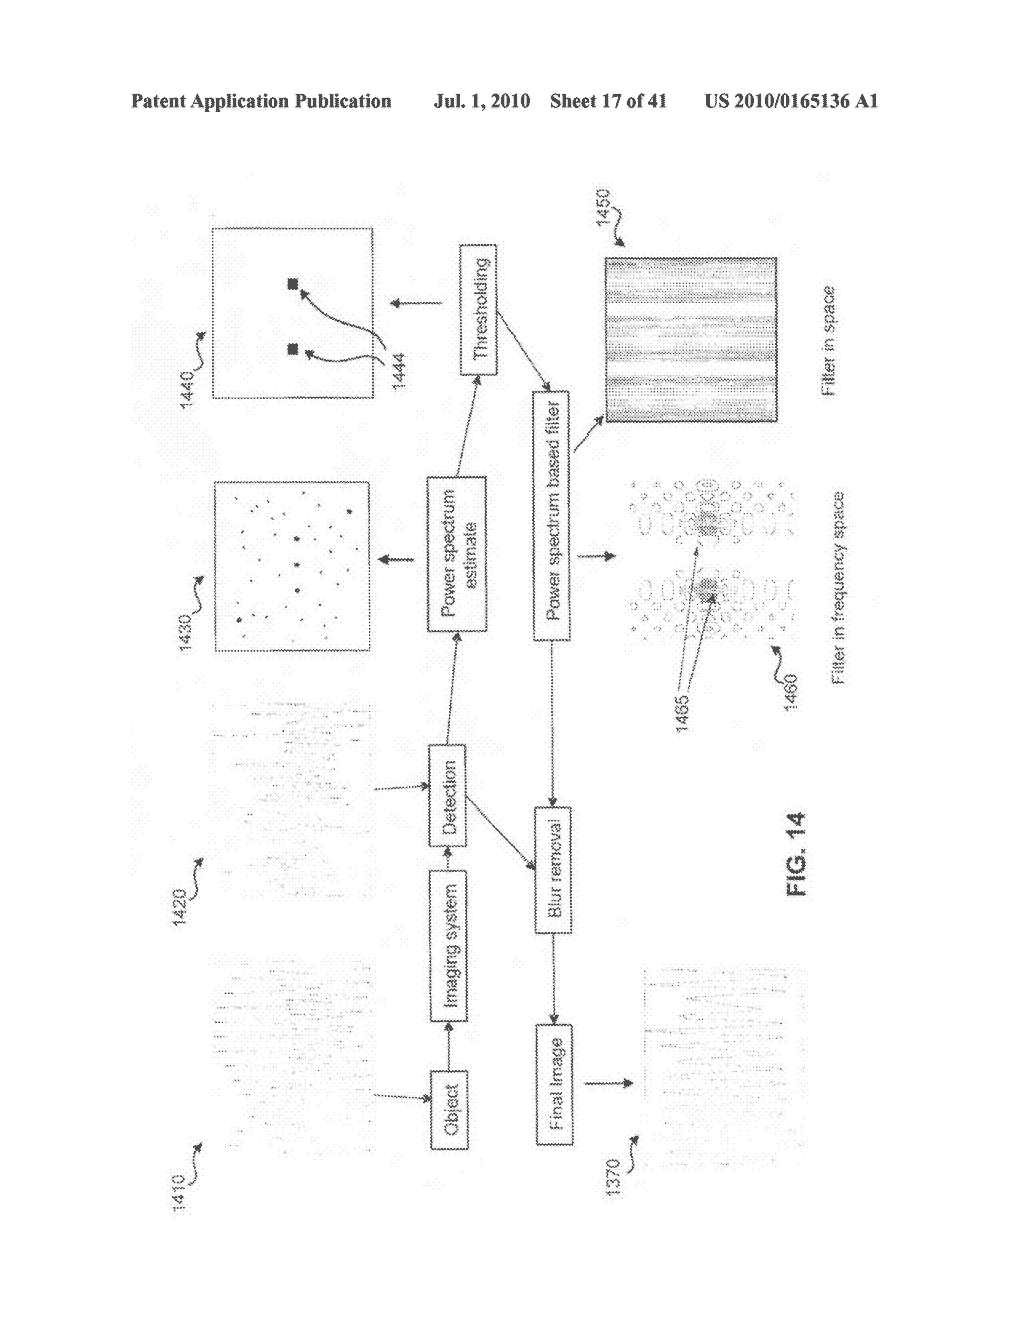 Optical Imaging Systems And Methods Utilizing Nonlinear And/Or Spatially Varying Image Processing - diagram, schematic, and image 18